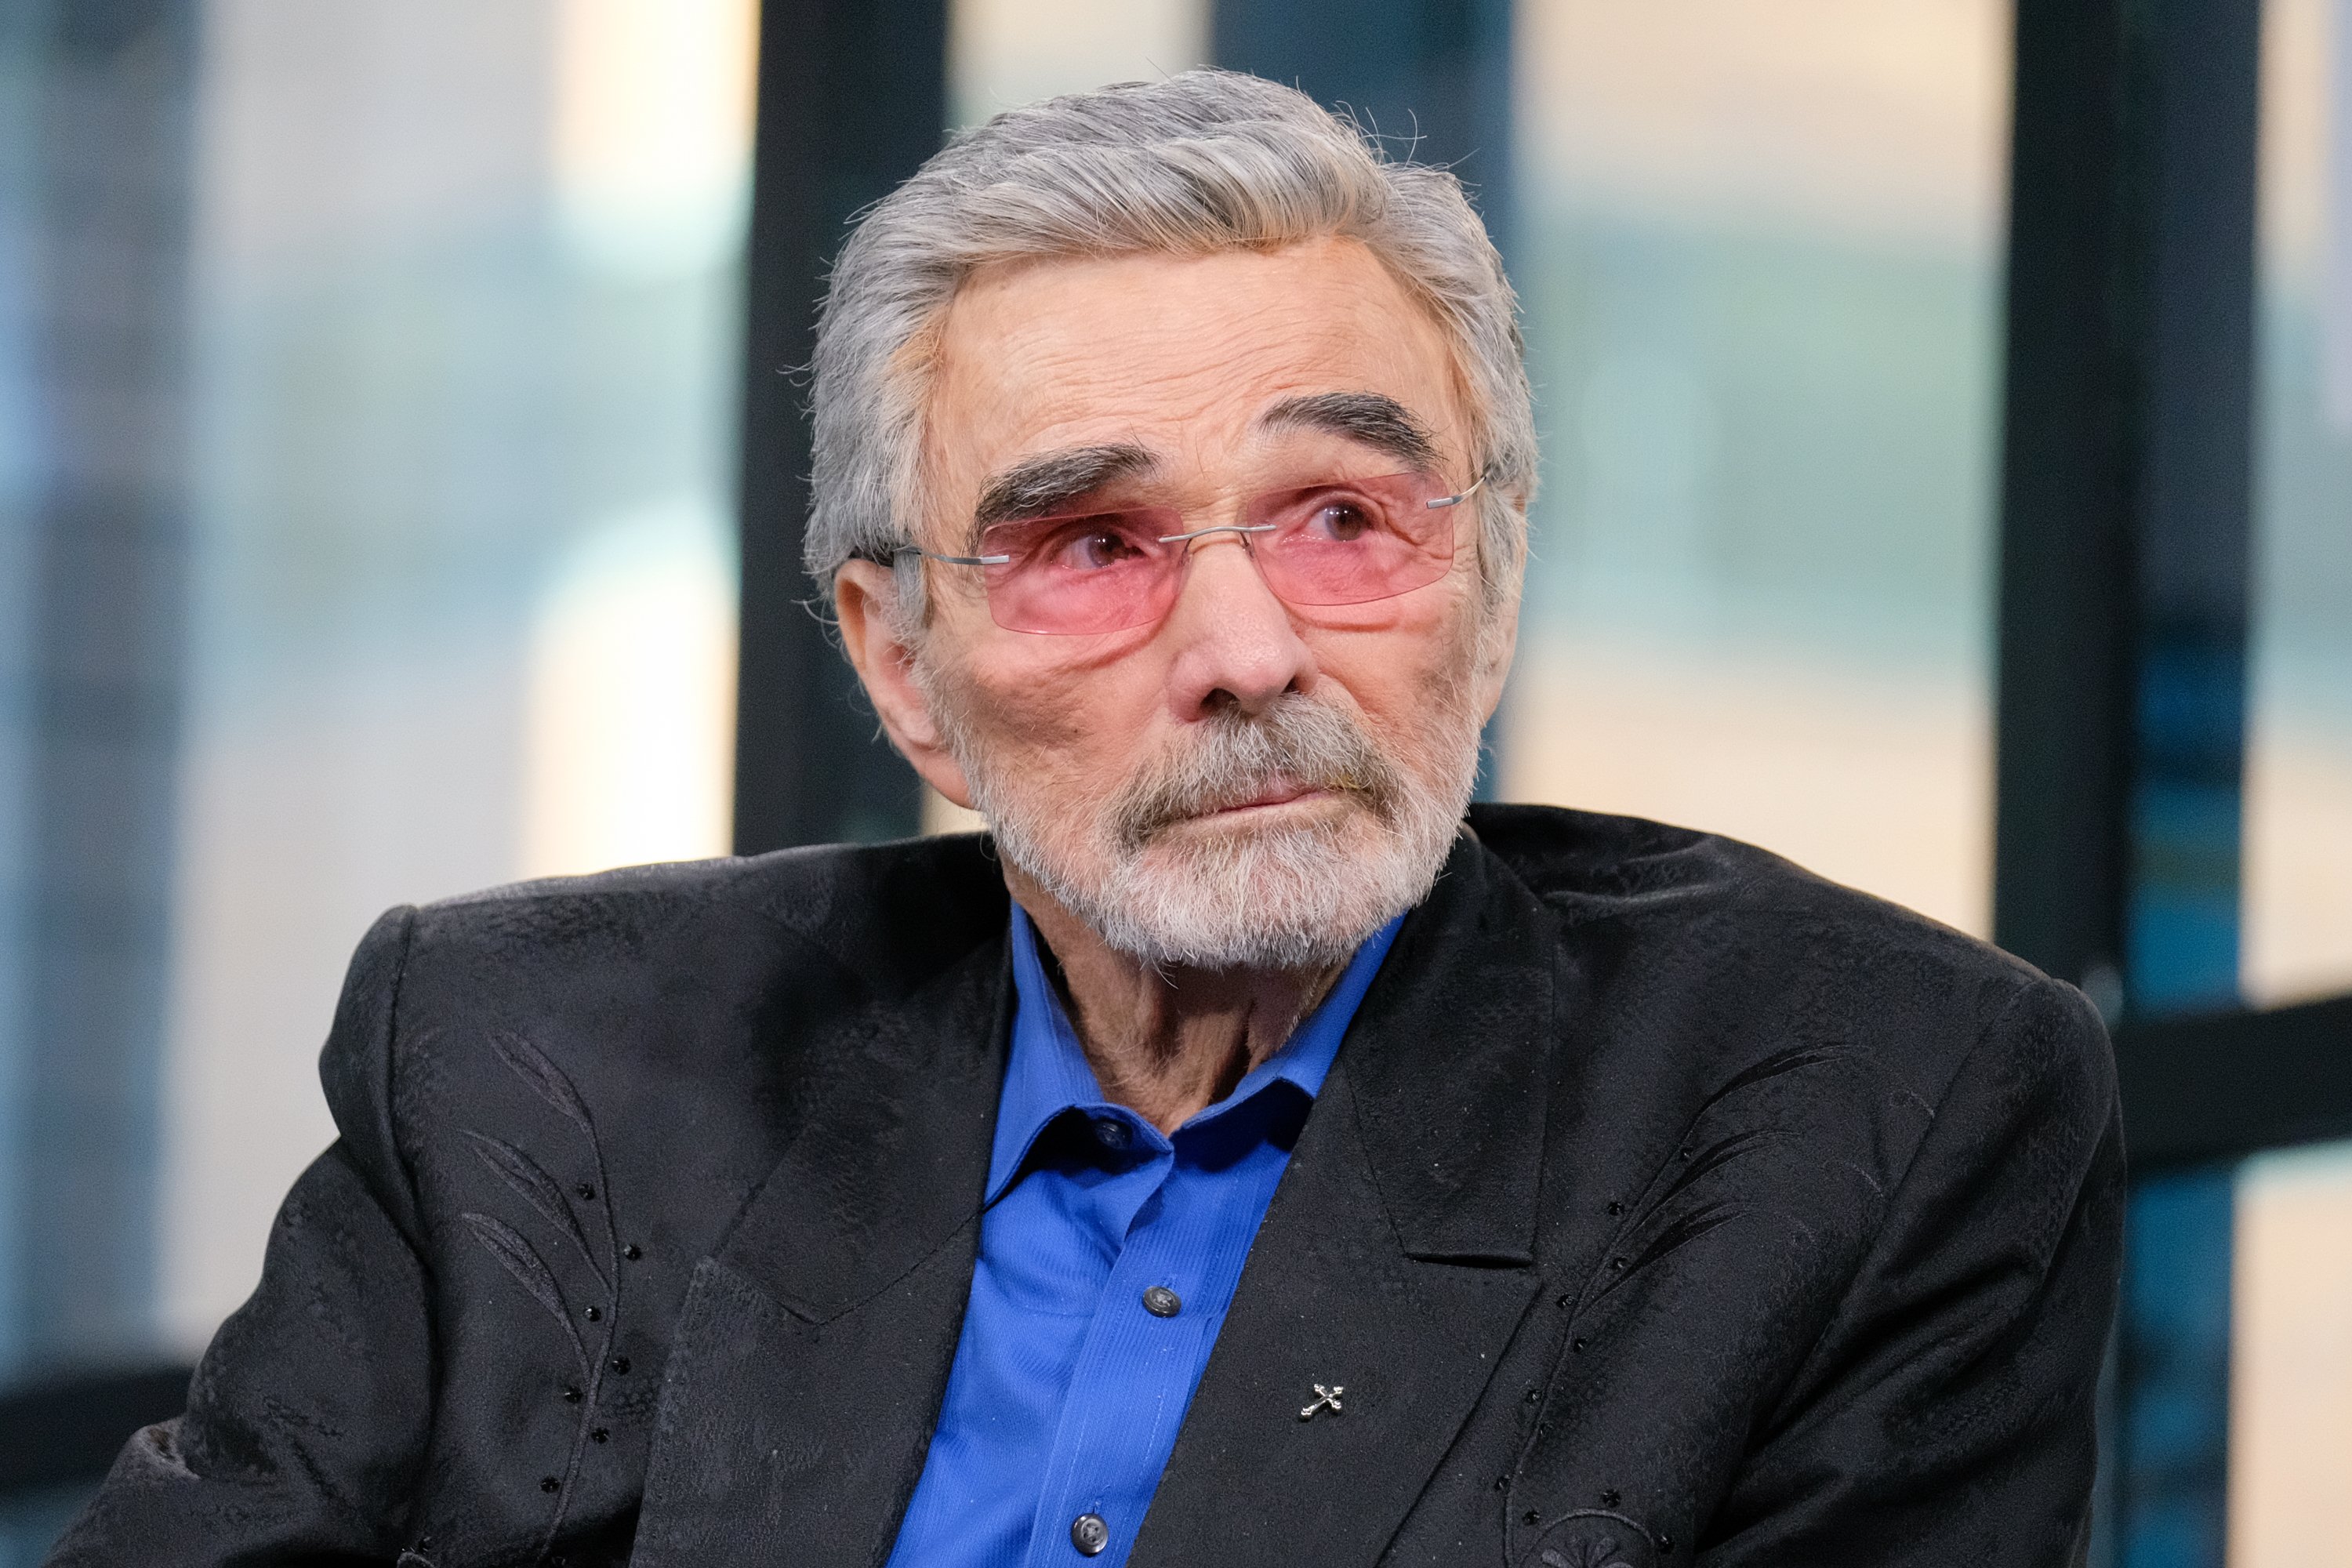 Actor Burt Reynolds discusses the film "The Last Movie Star"  on March 15, 2018 In New York City. | Getty Images. | Source: Getty Images